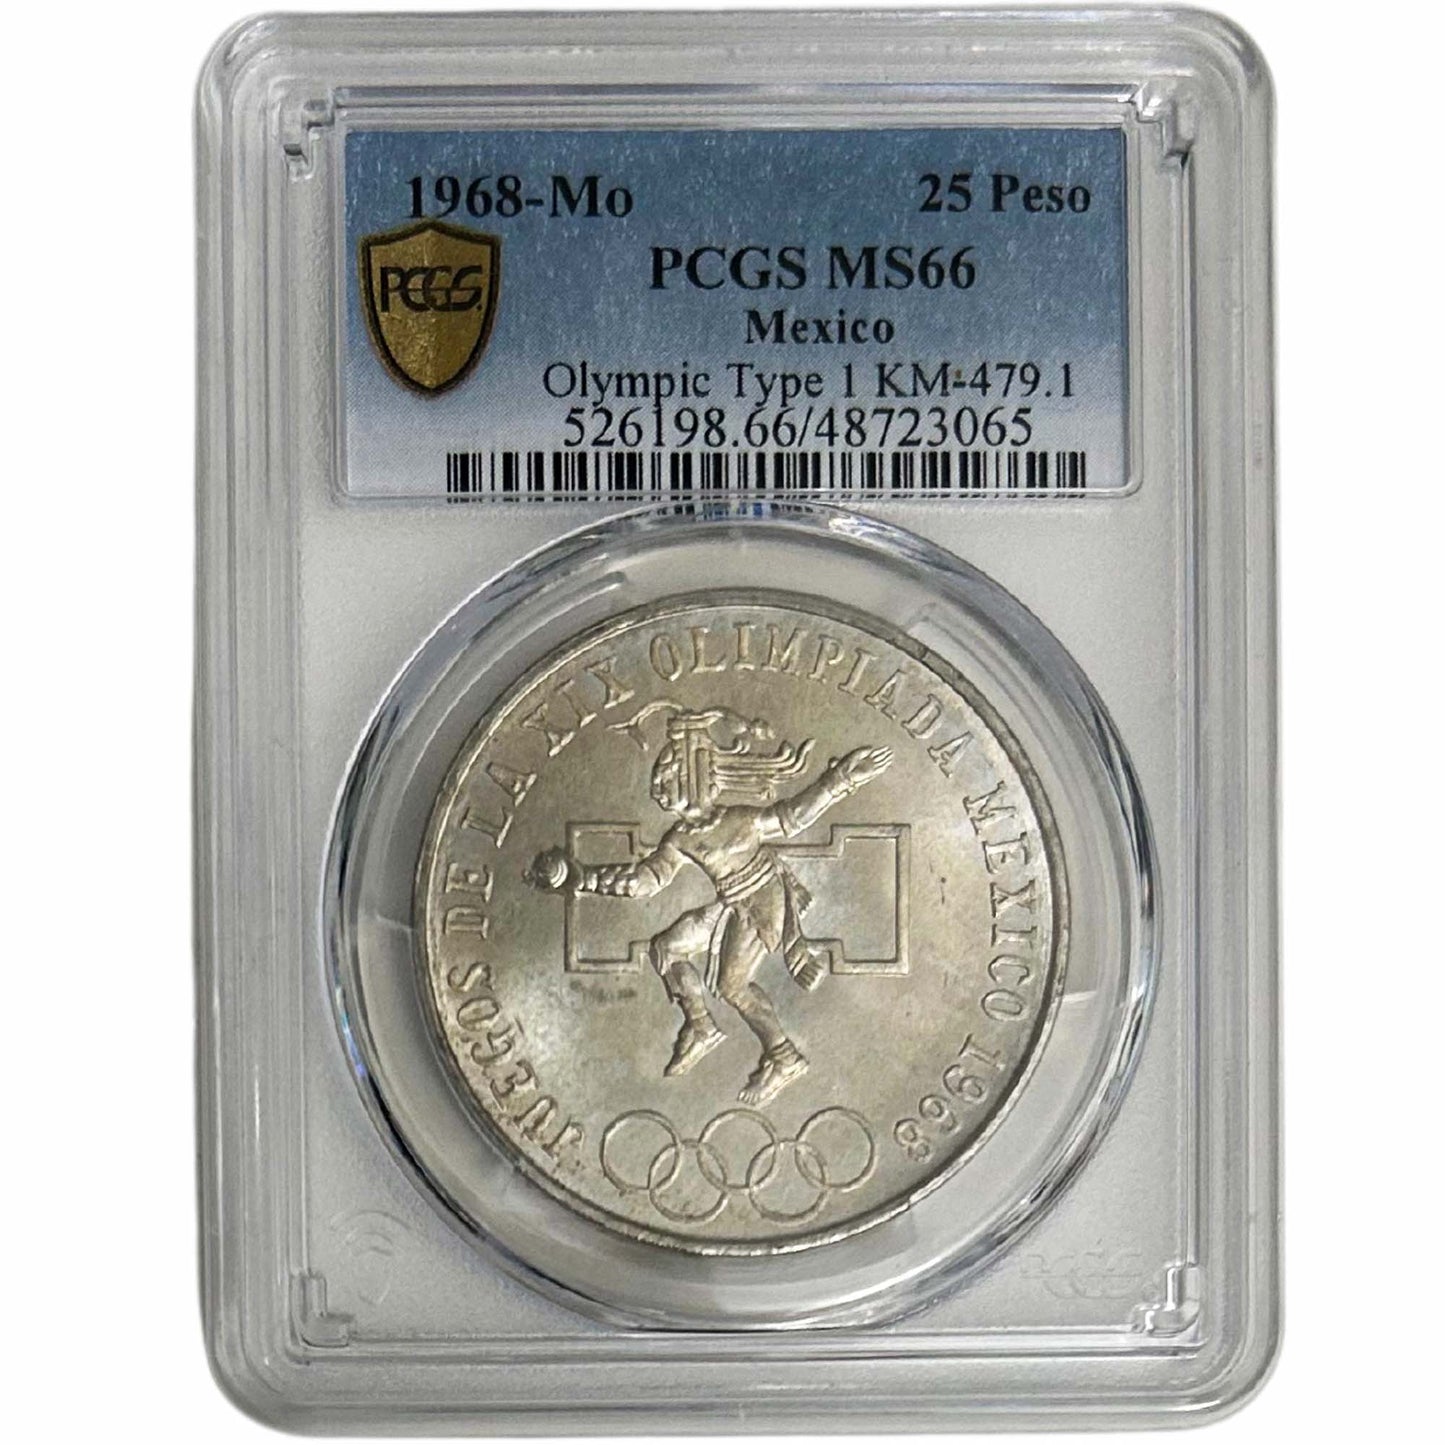 1968-Mo 25 Peso PCGS MS66 Olympic Type 1 KM-479 Front